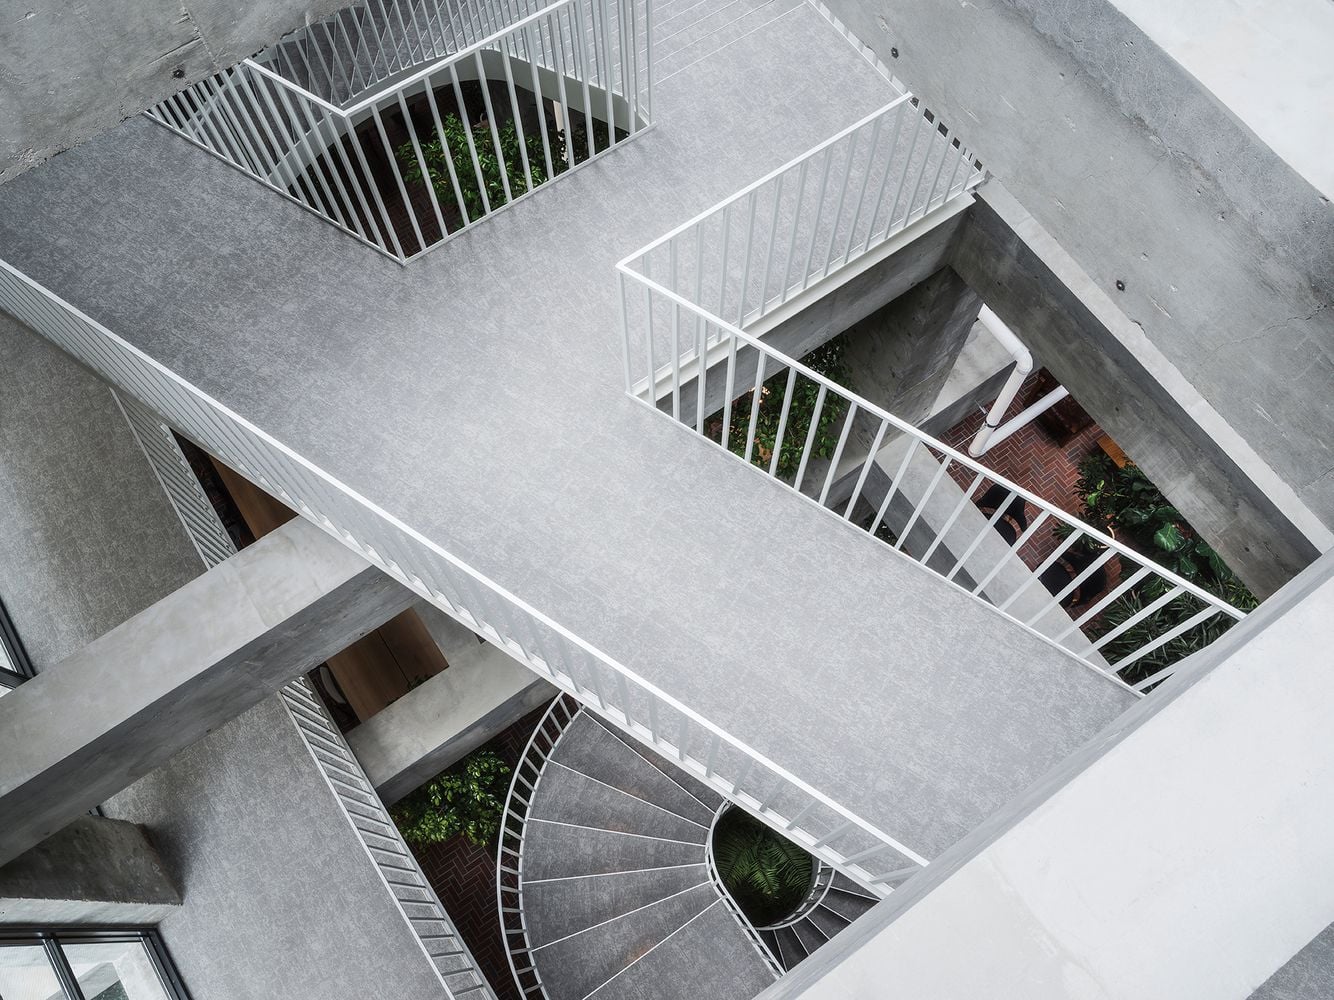 Walkways and spiral staircases connect the atrium to private guest rooms above.